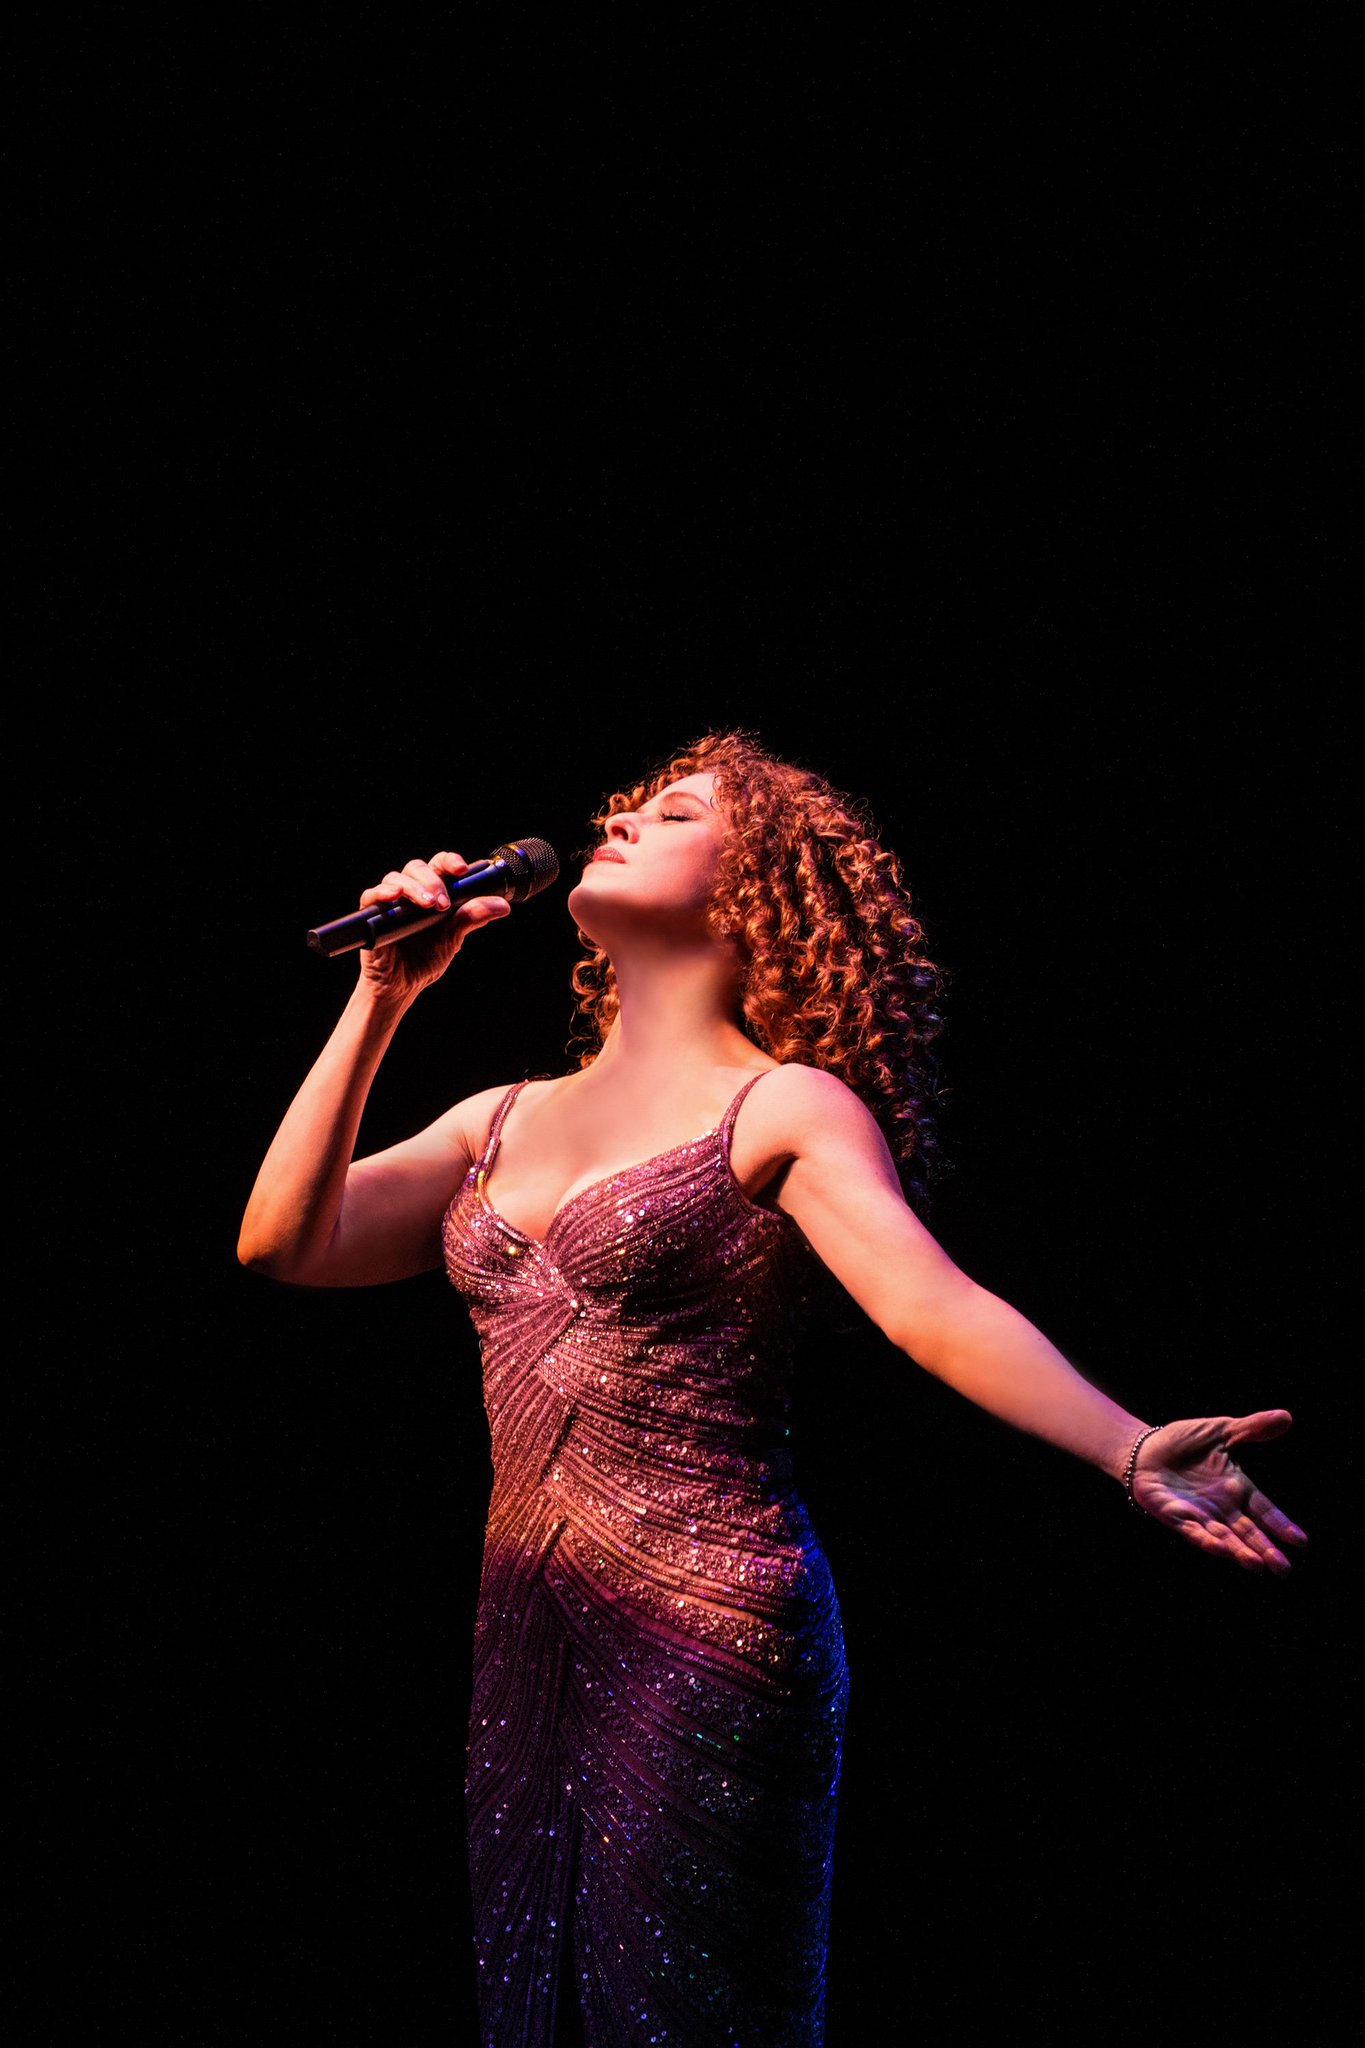 HAPPY BIRTHDAY TO THE LEGEND THE QUEEN THE ICON WHO IS MS BERNADETTE PETERS      